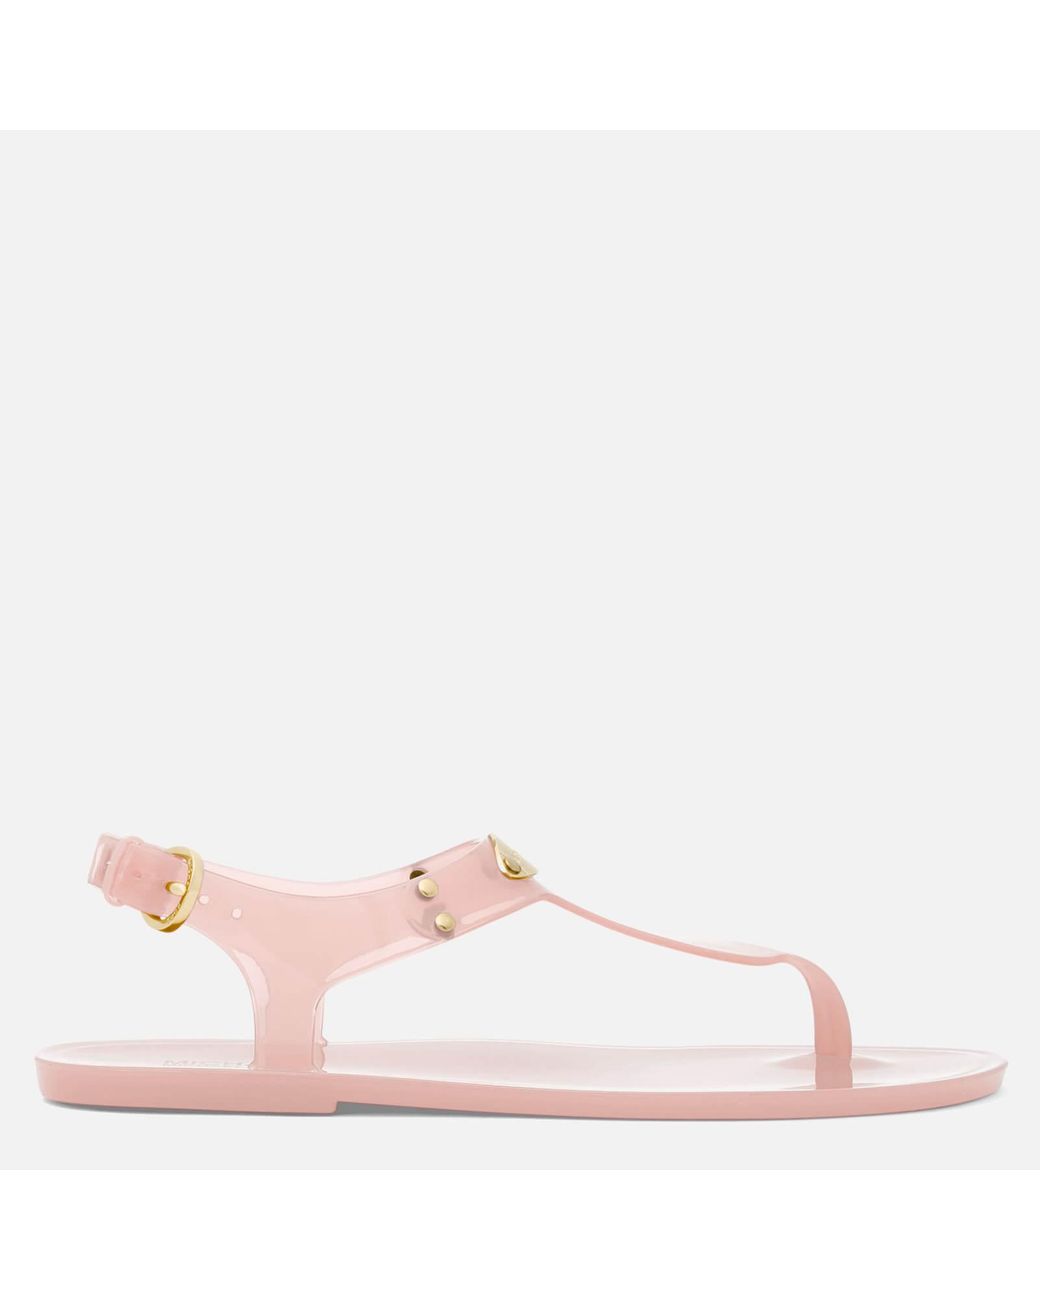 Michael Kors Plate Thong Flat Jelly Sandals in Pink | Lyst